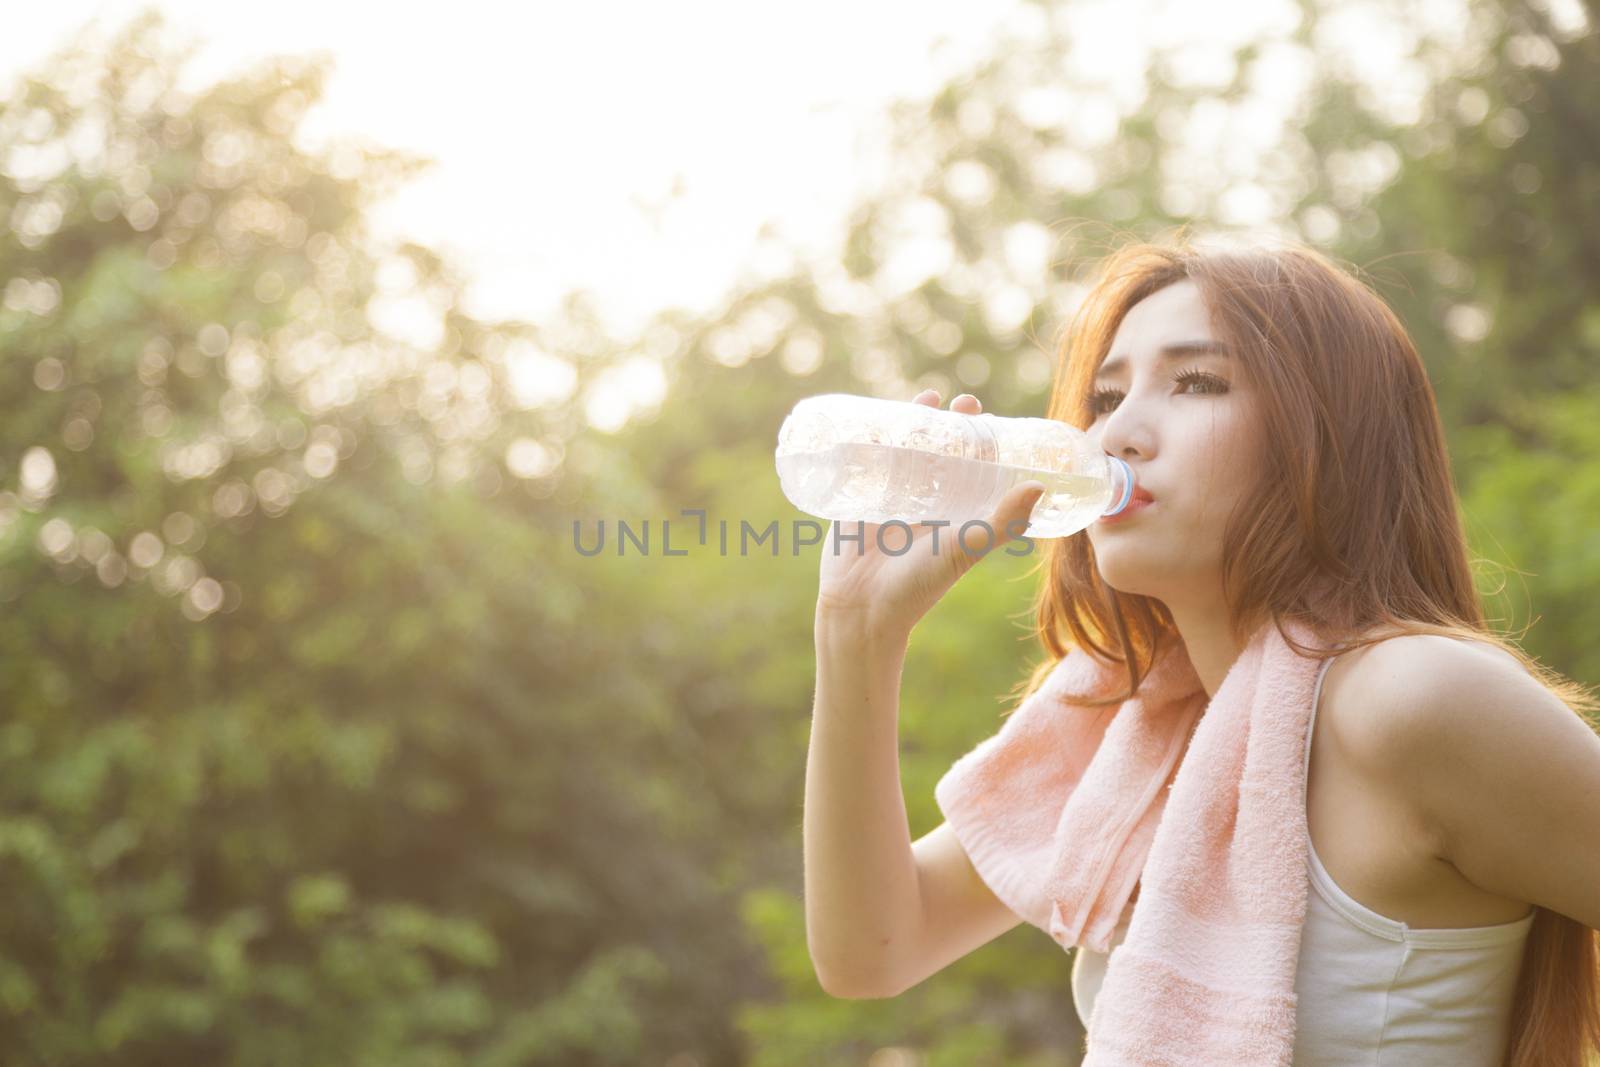 Woman sit and drink after exercise. On the lawn after a workout in the park.